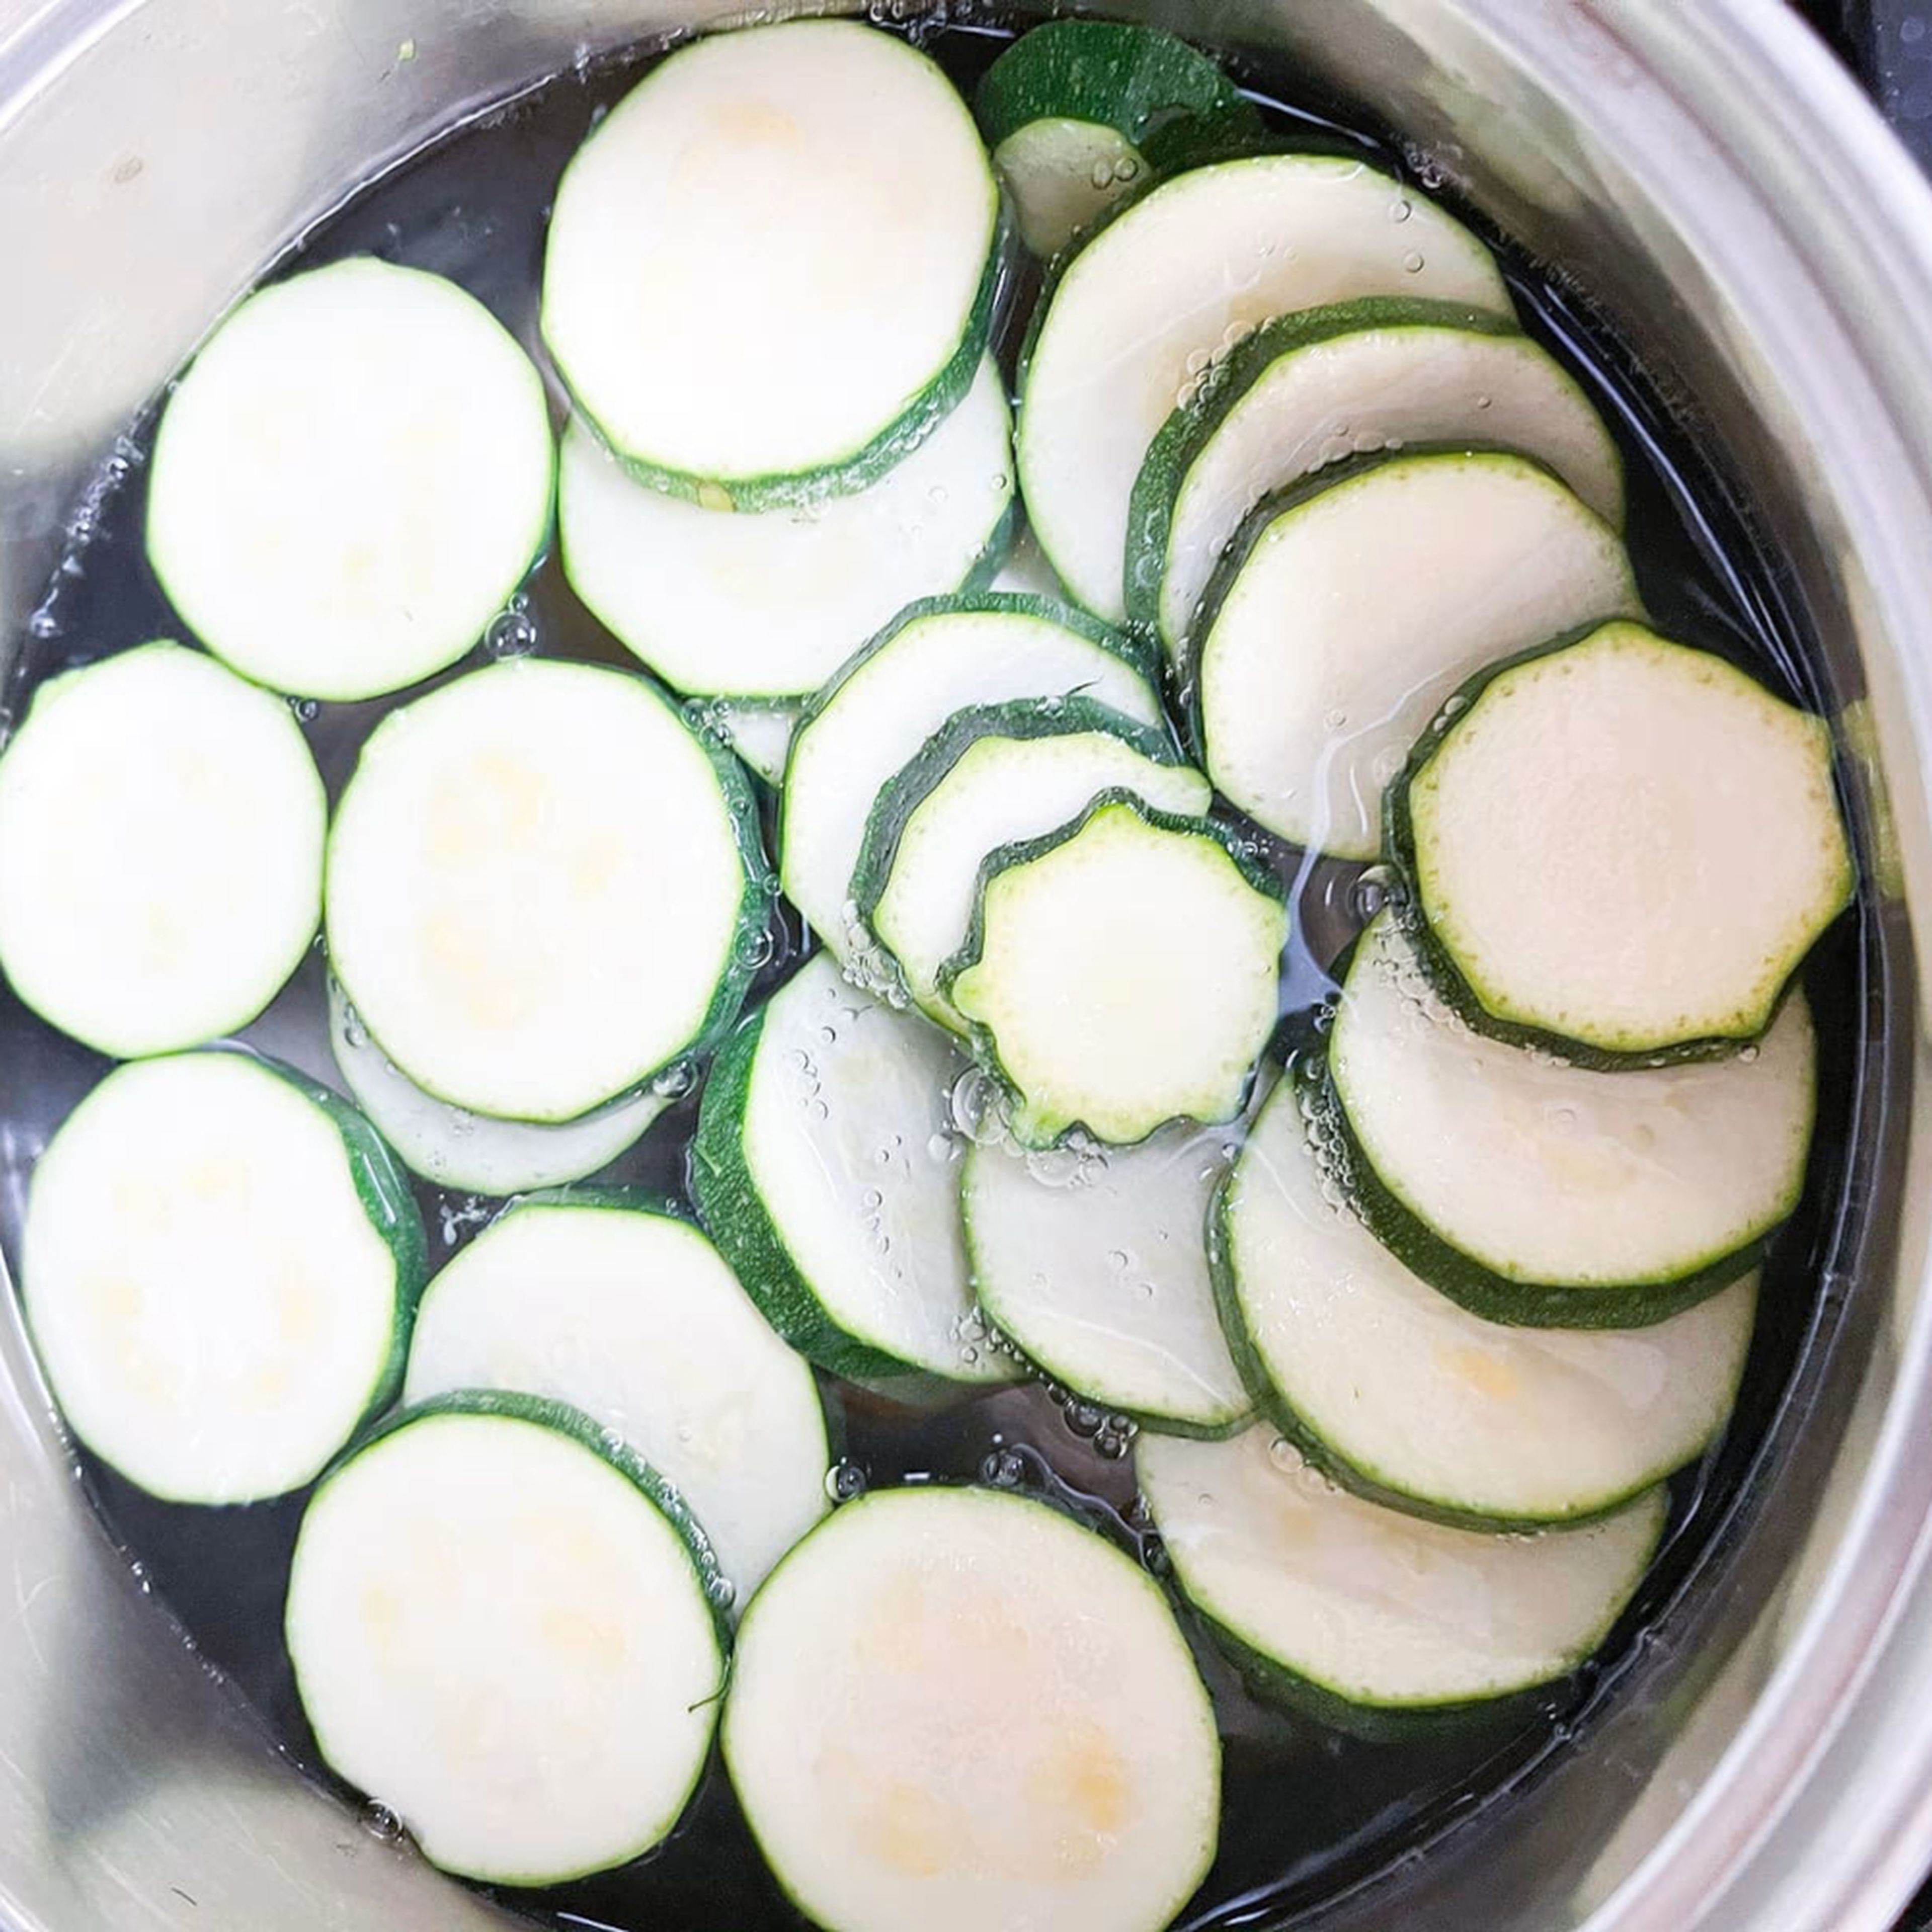 In a bowl, boil the zucchini, half the onion quantity, salt, and pepper for 5 minutes.